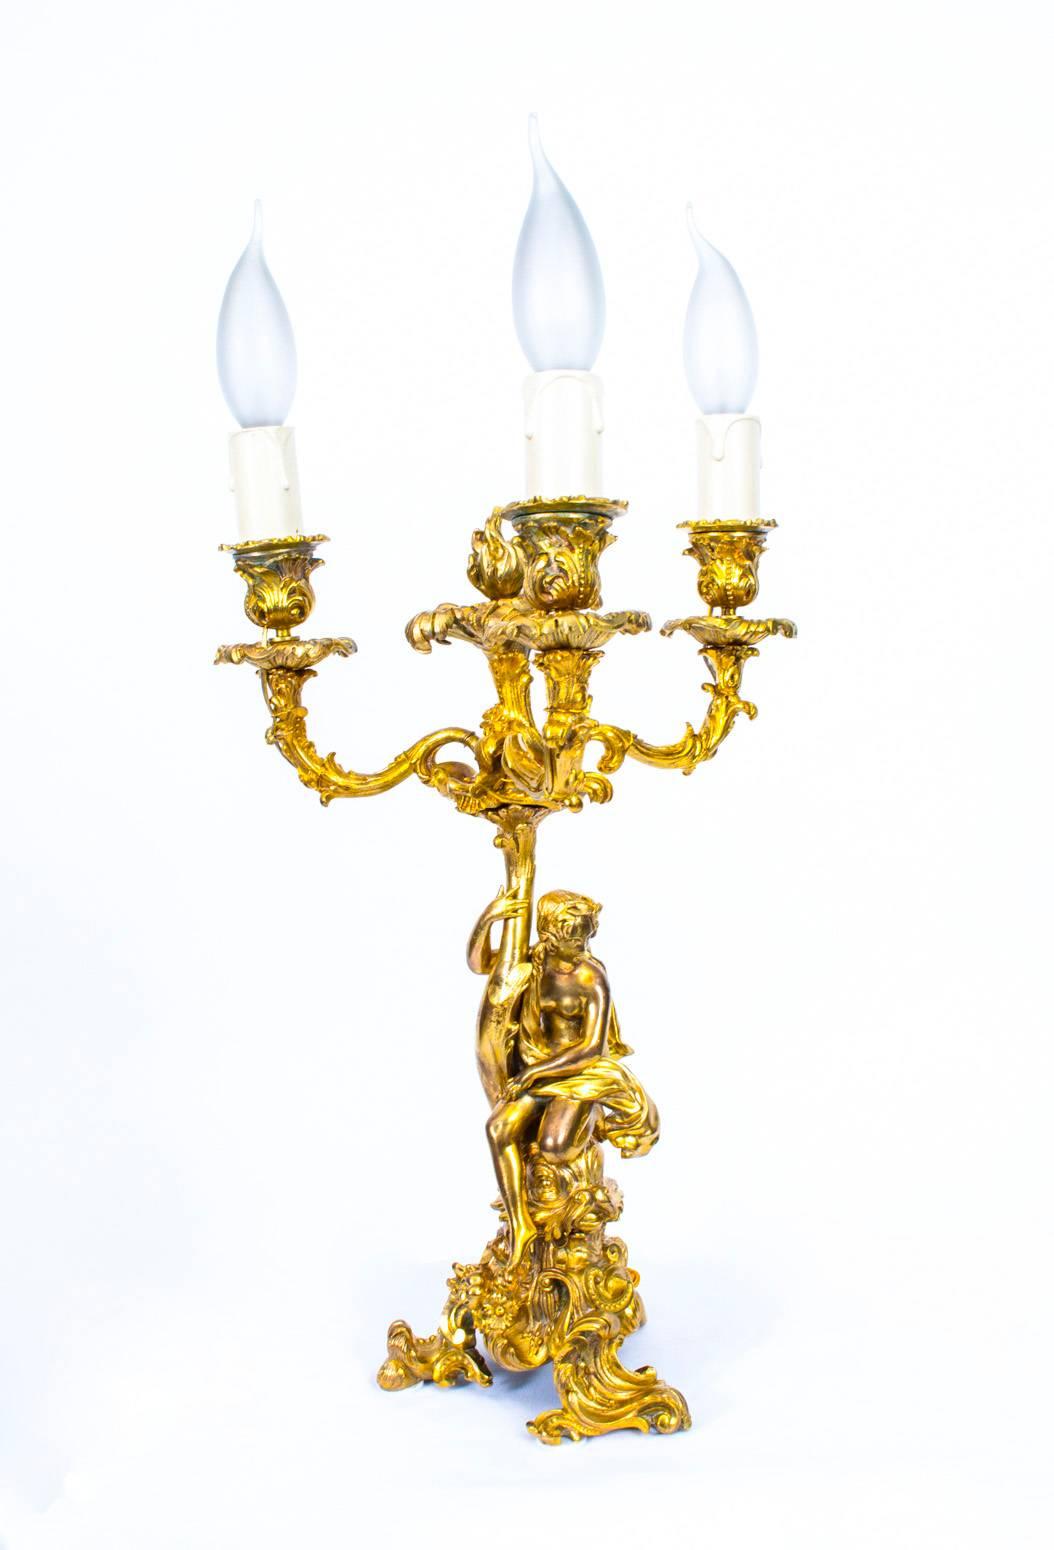 A gorgeous fine quality pair of antique Rococo ormolu three-light candelabra that have been later wired for electricity, in the Classic French manner, circa 1860 in date.

The beautifully sculpted and tooled gilded bronze candelabra feature a pair